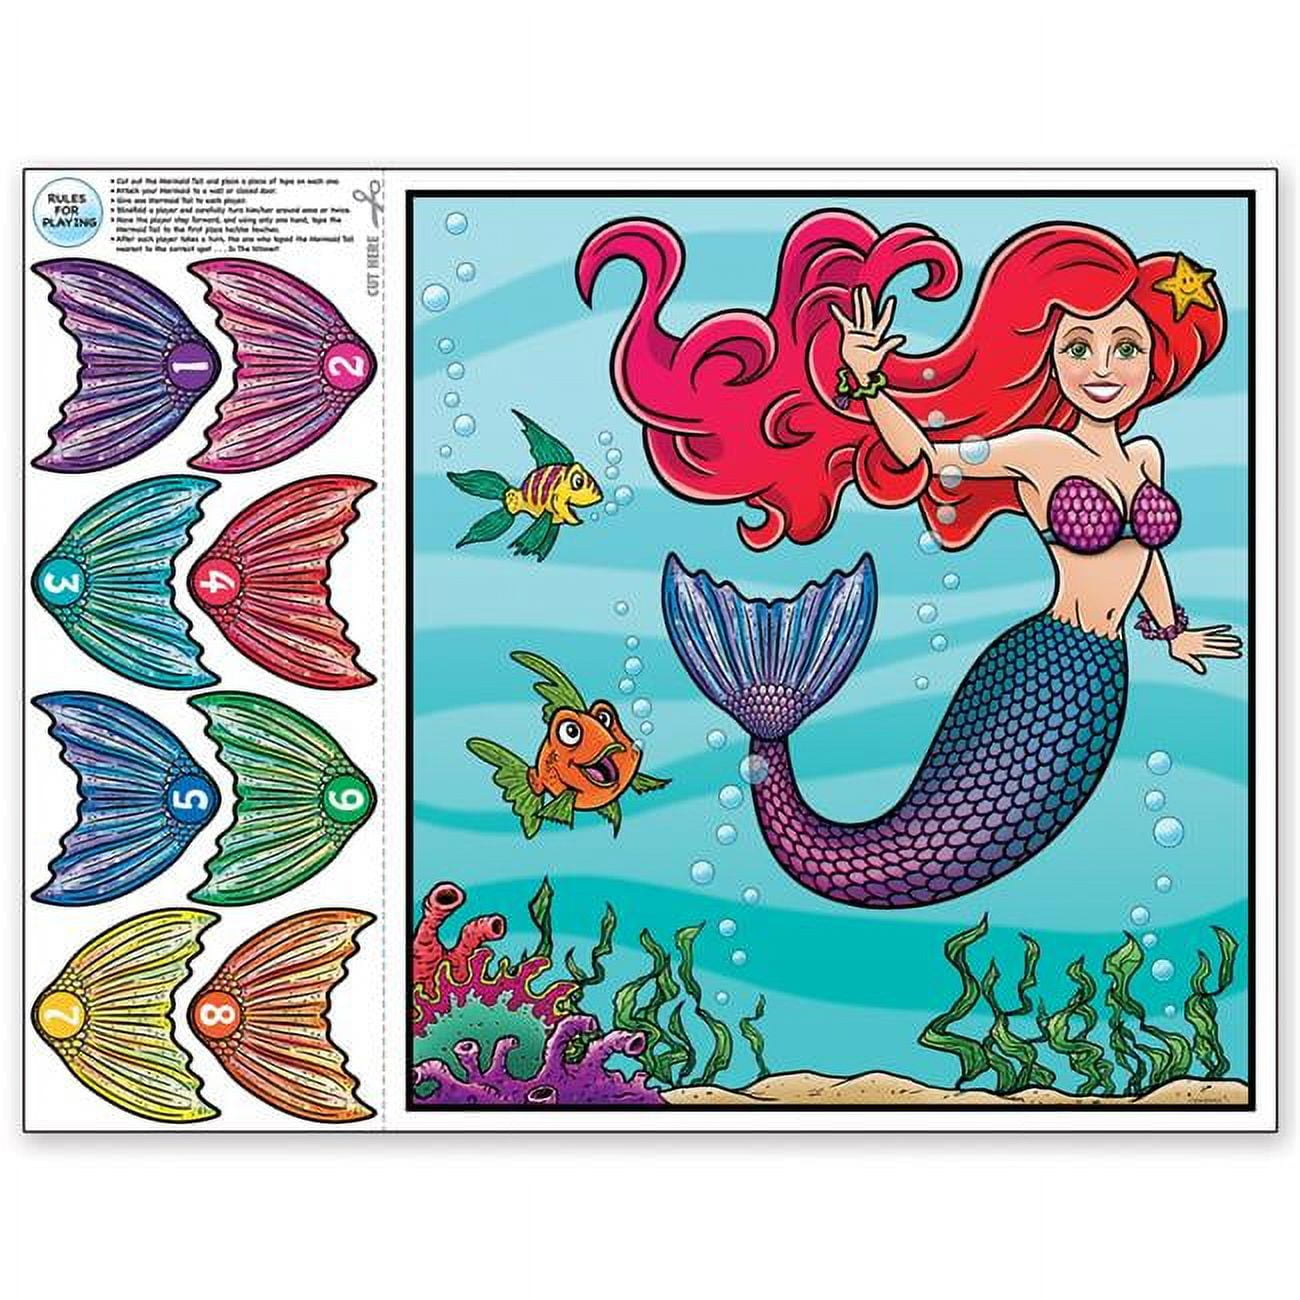 Beistle 60664 19 X 17.5 In. Pin The Tail On The Mermaid Game - Pack Of 24